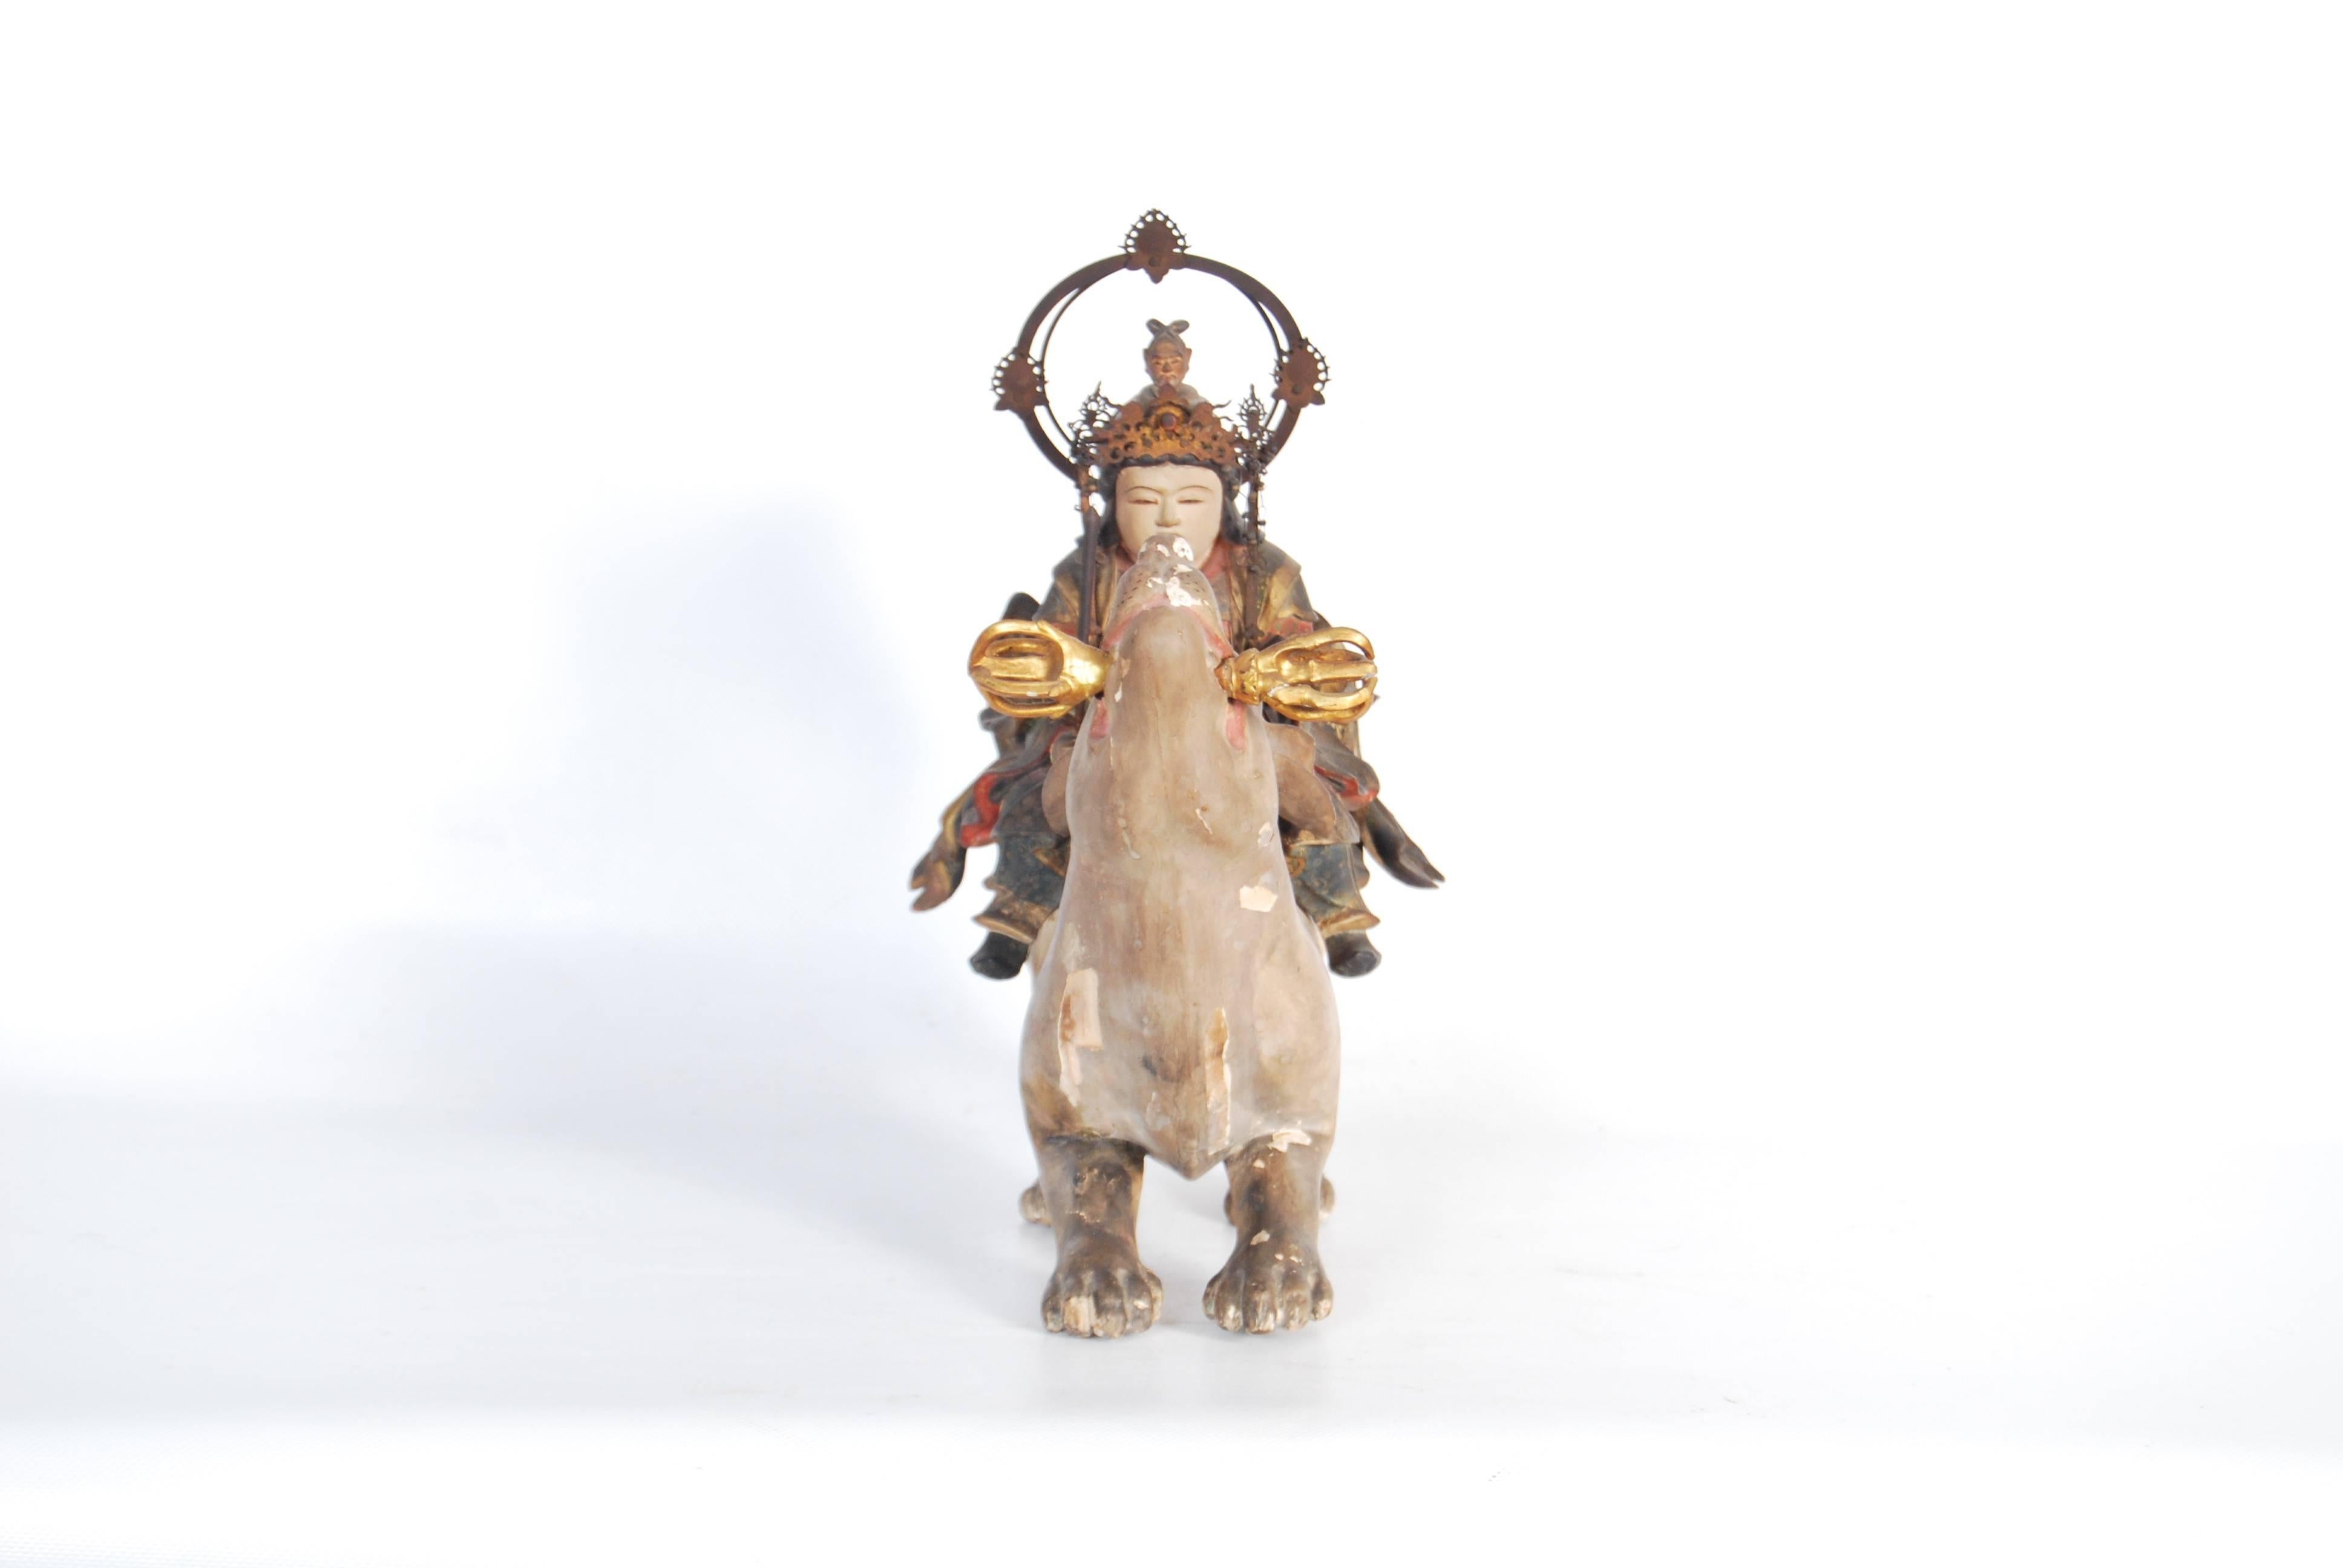 Rare and highly unusual antique Japanese statue of the esoteric deity 'Dakini Ten,' a Buddhist goddess who was associated with the agricultural deity Inari in Japan, and is represented atop a holy white fox (often linked with Inari) clutching a